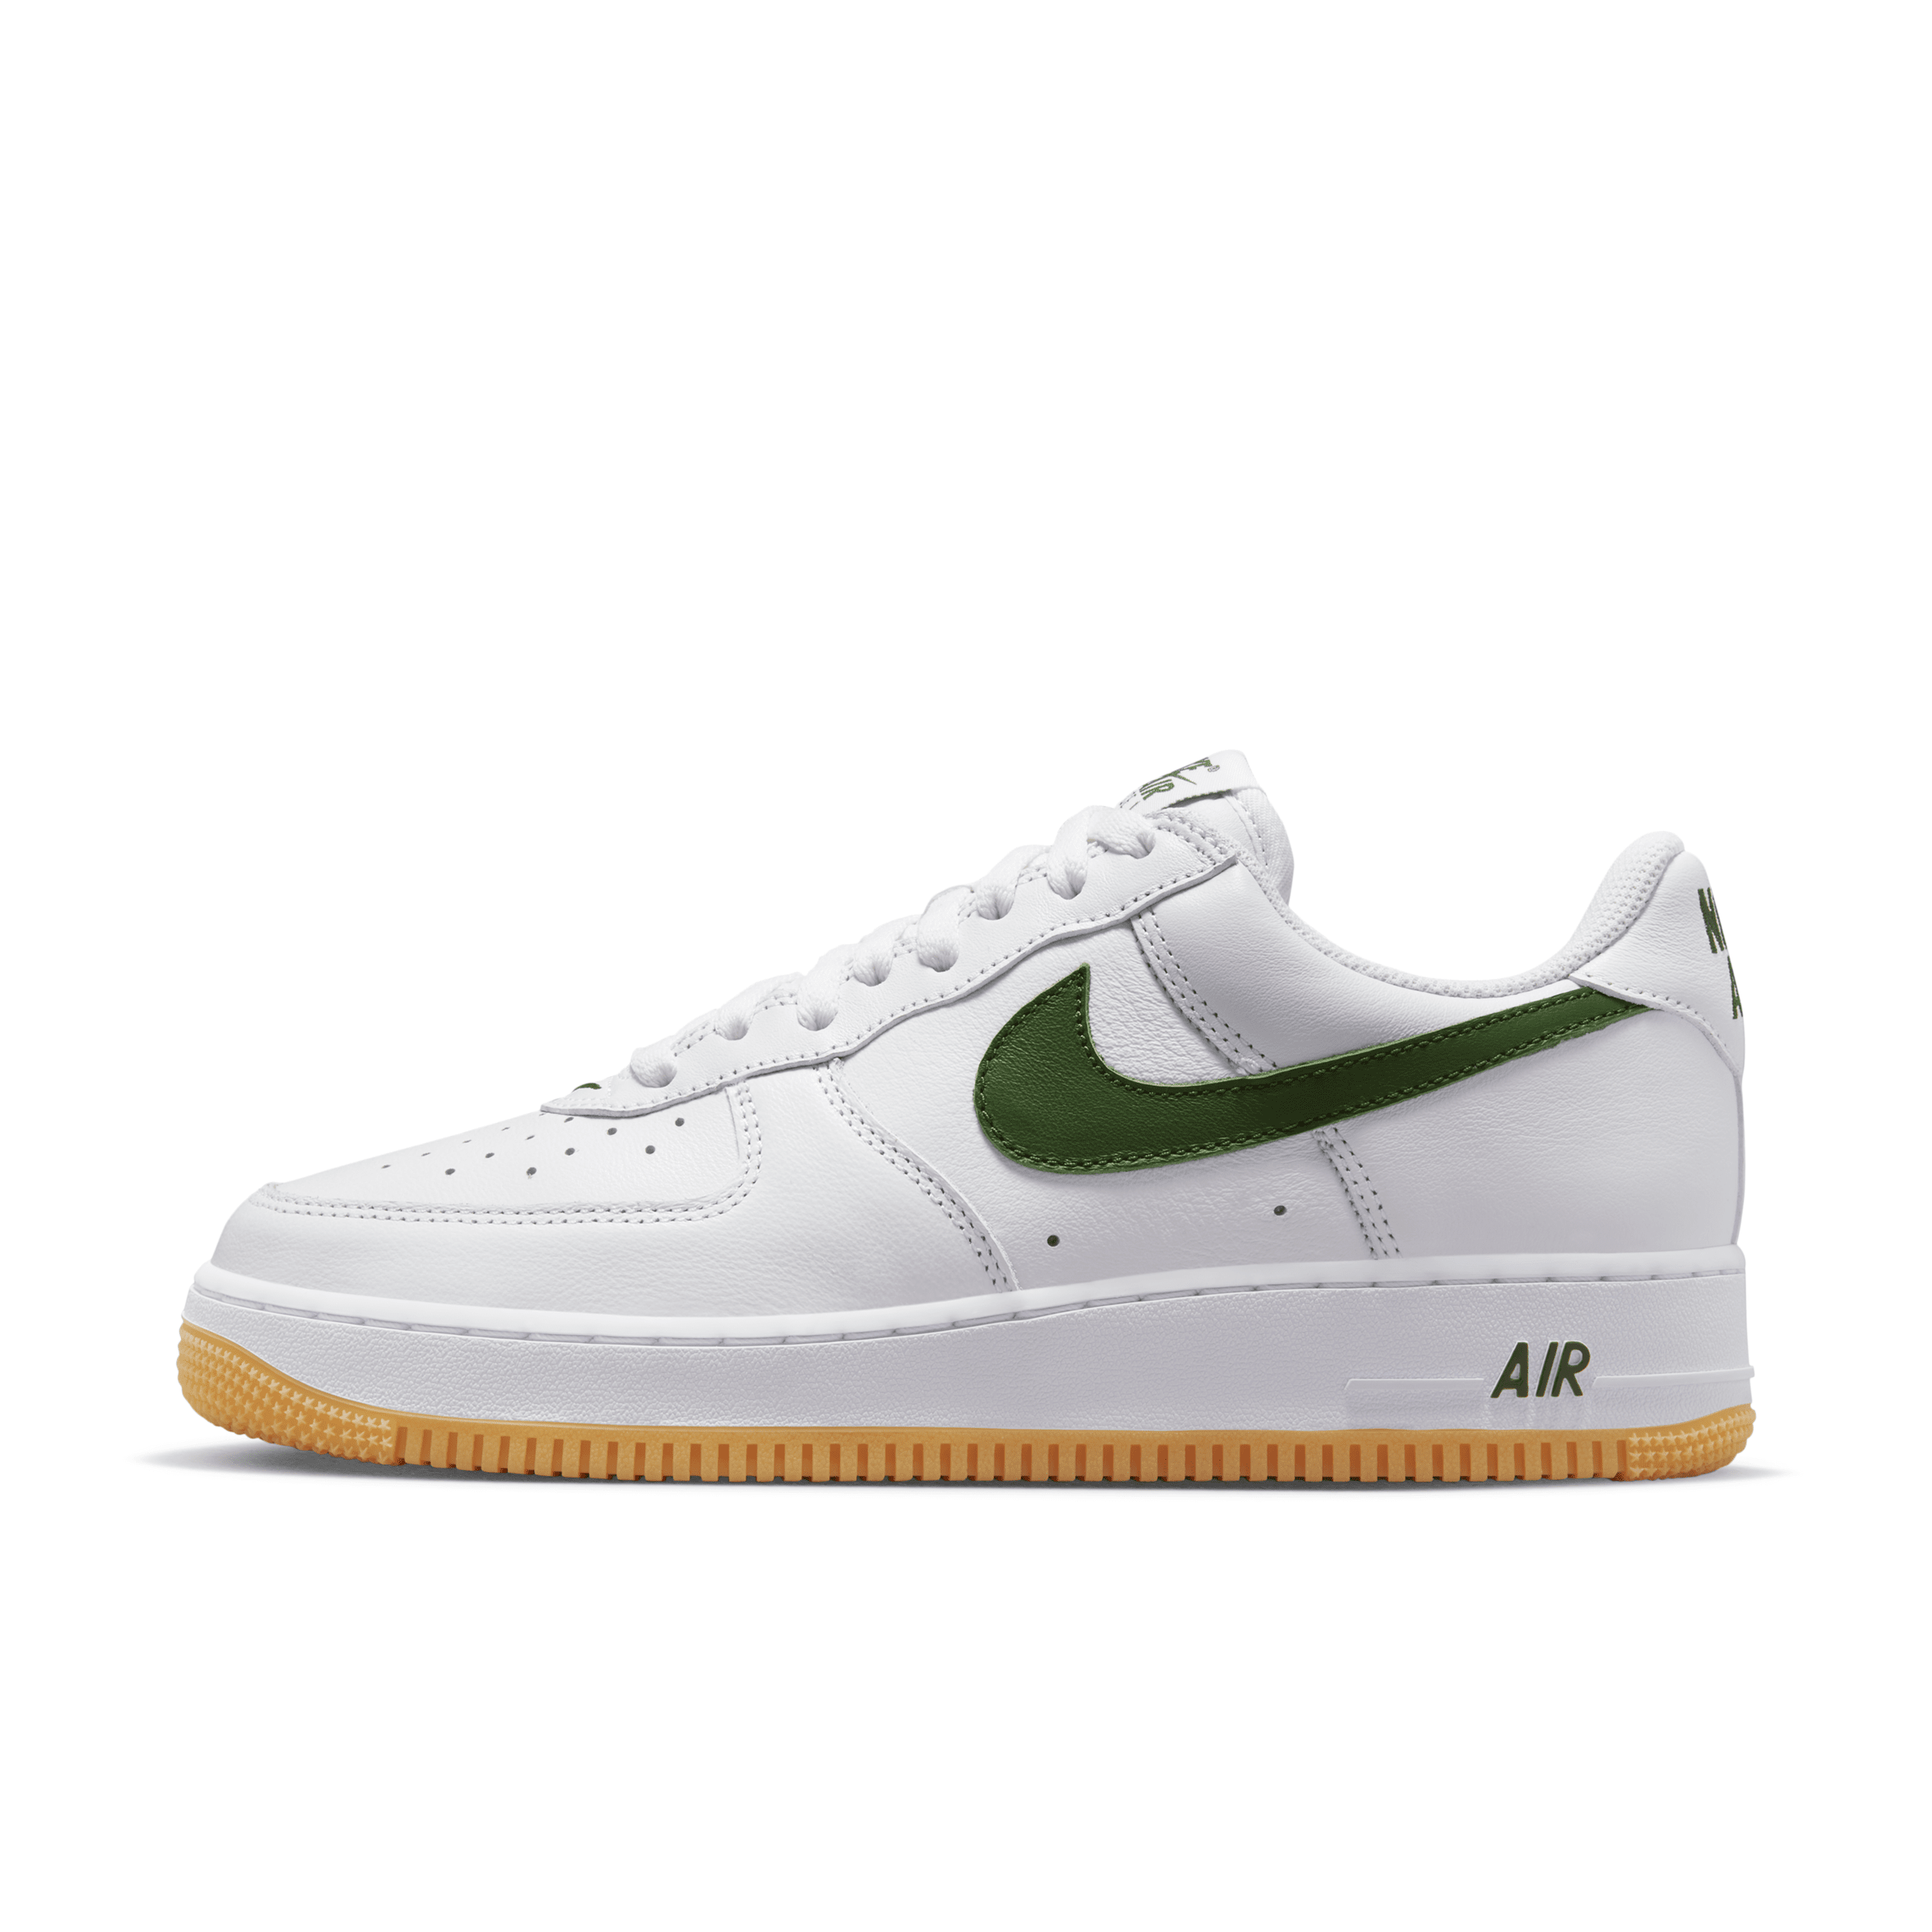 Nike Men's Air Force 1 Low Retro Shoes in White, Size: 4 | FD7039-101